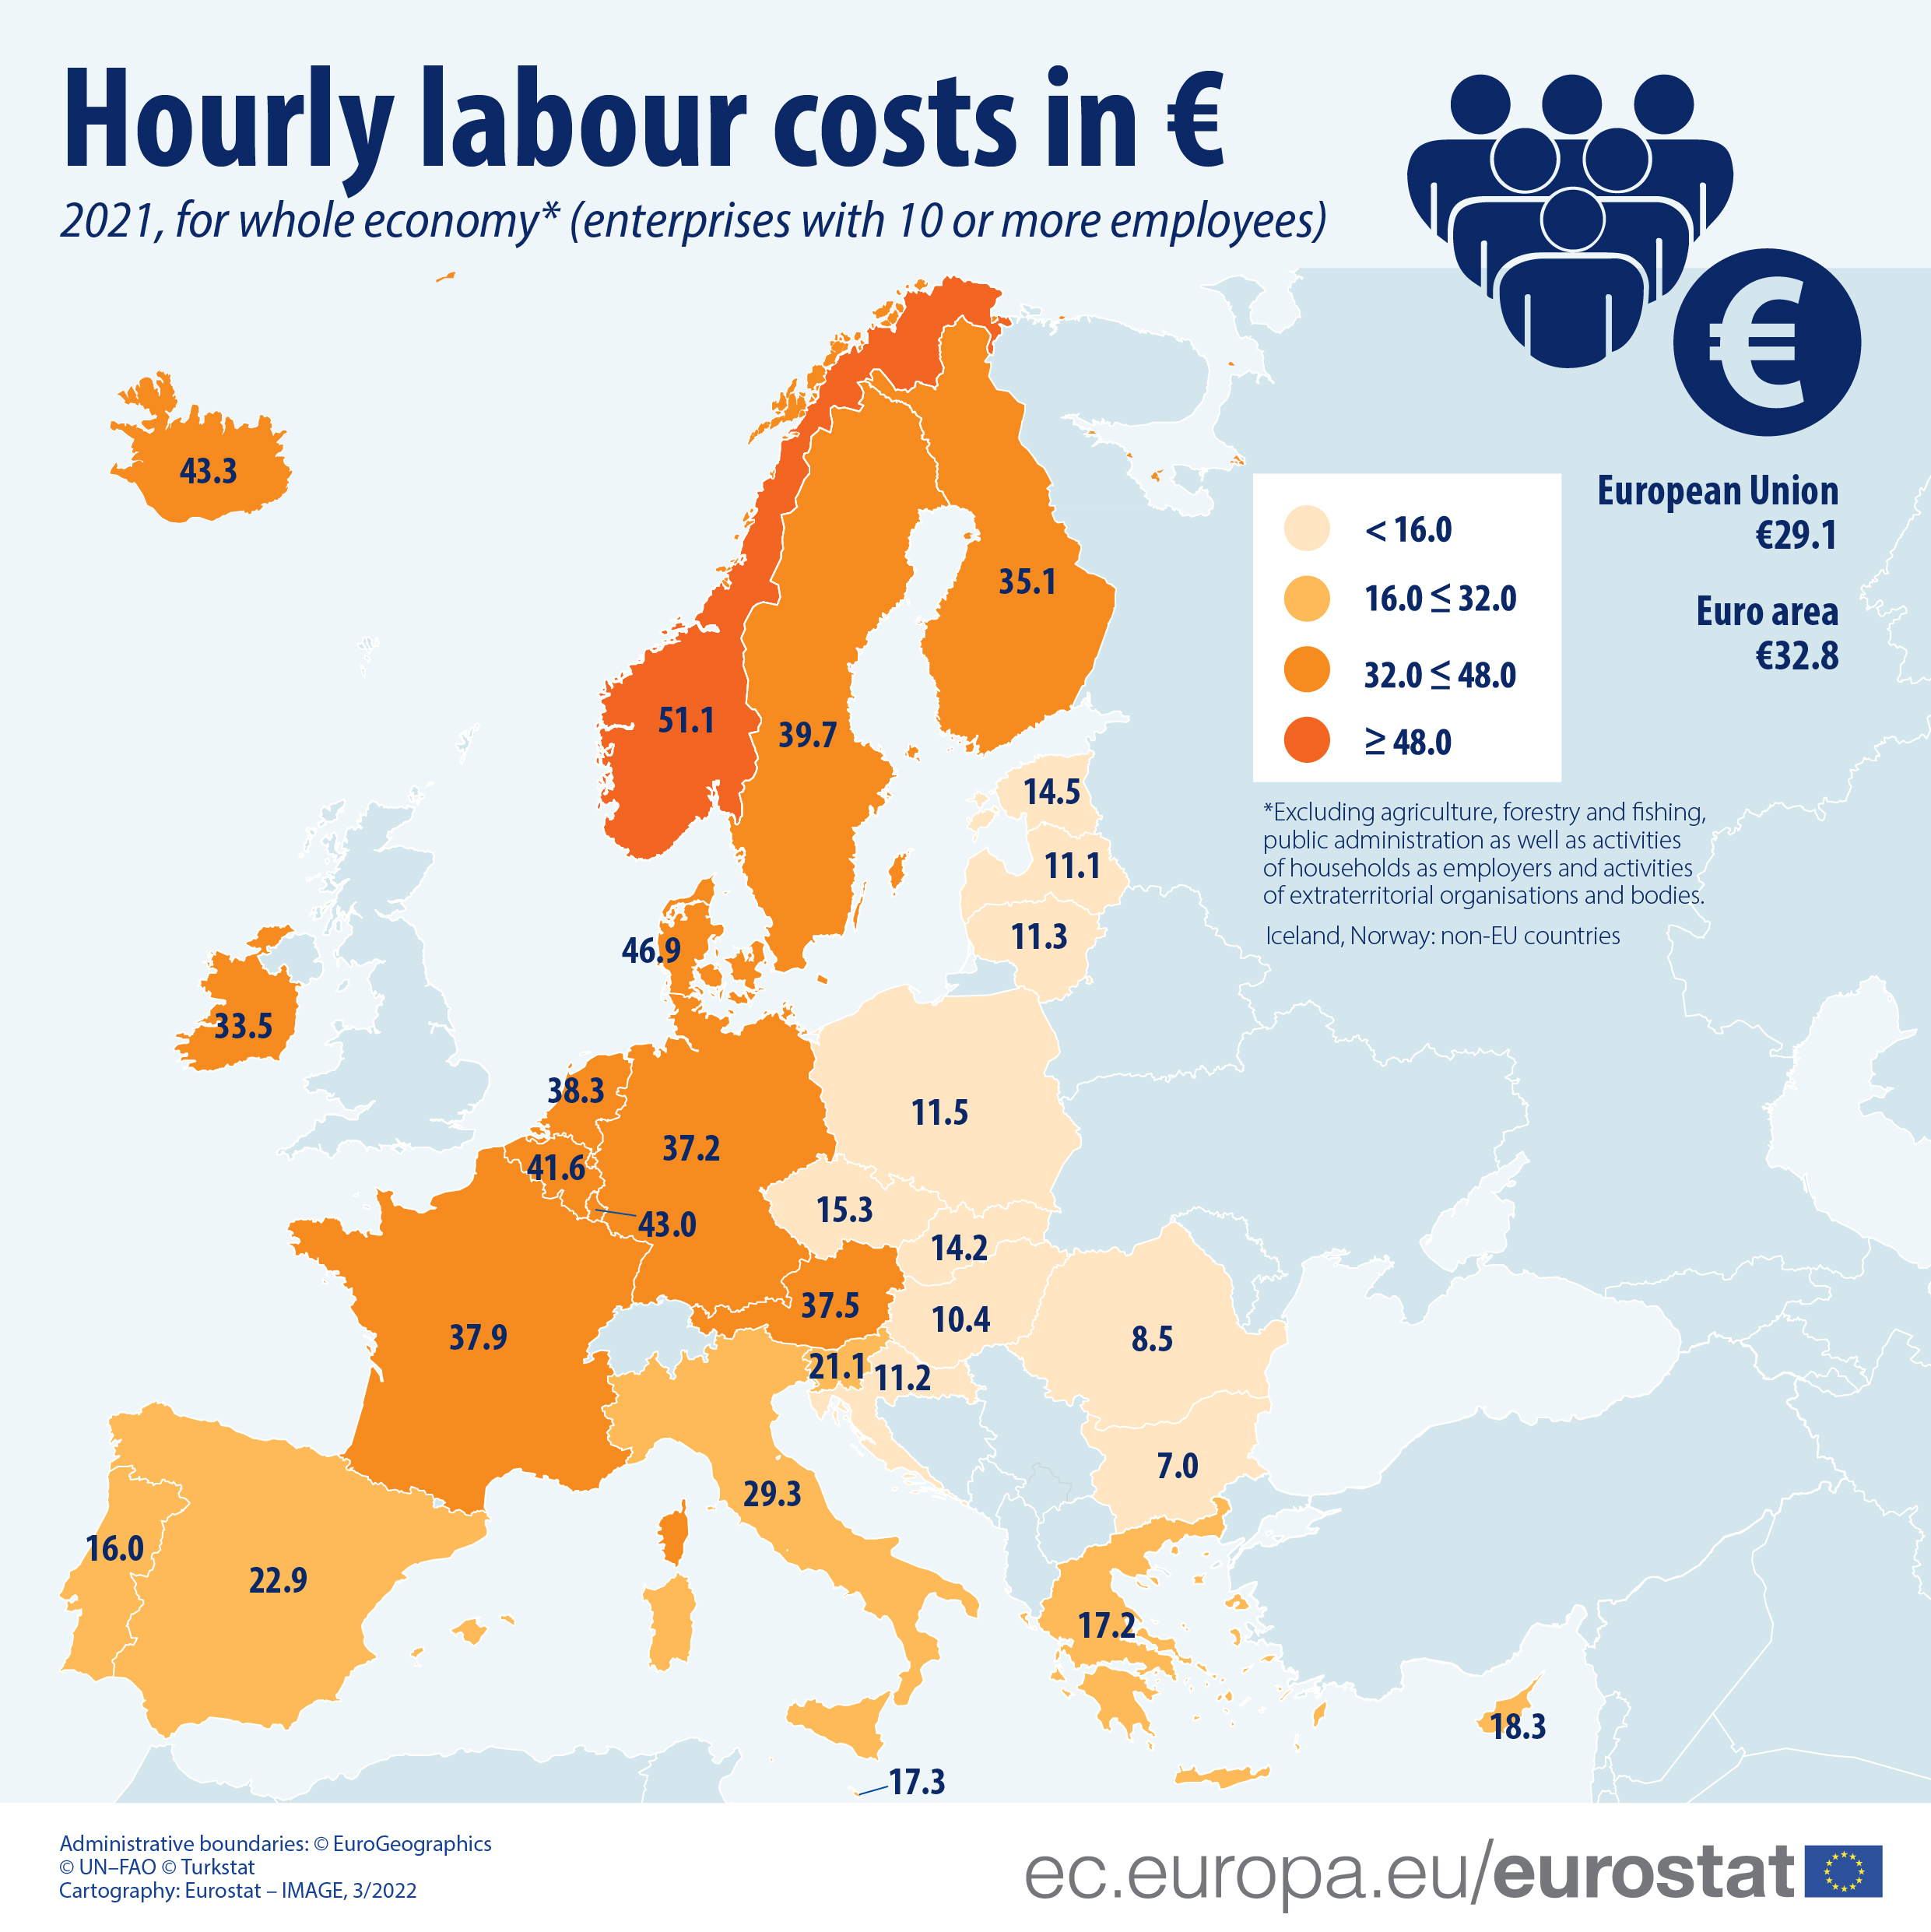 MAP: Hourly labour costs in euros, 2021, whole economy (enterprises with 10 or more employees)